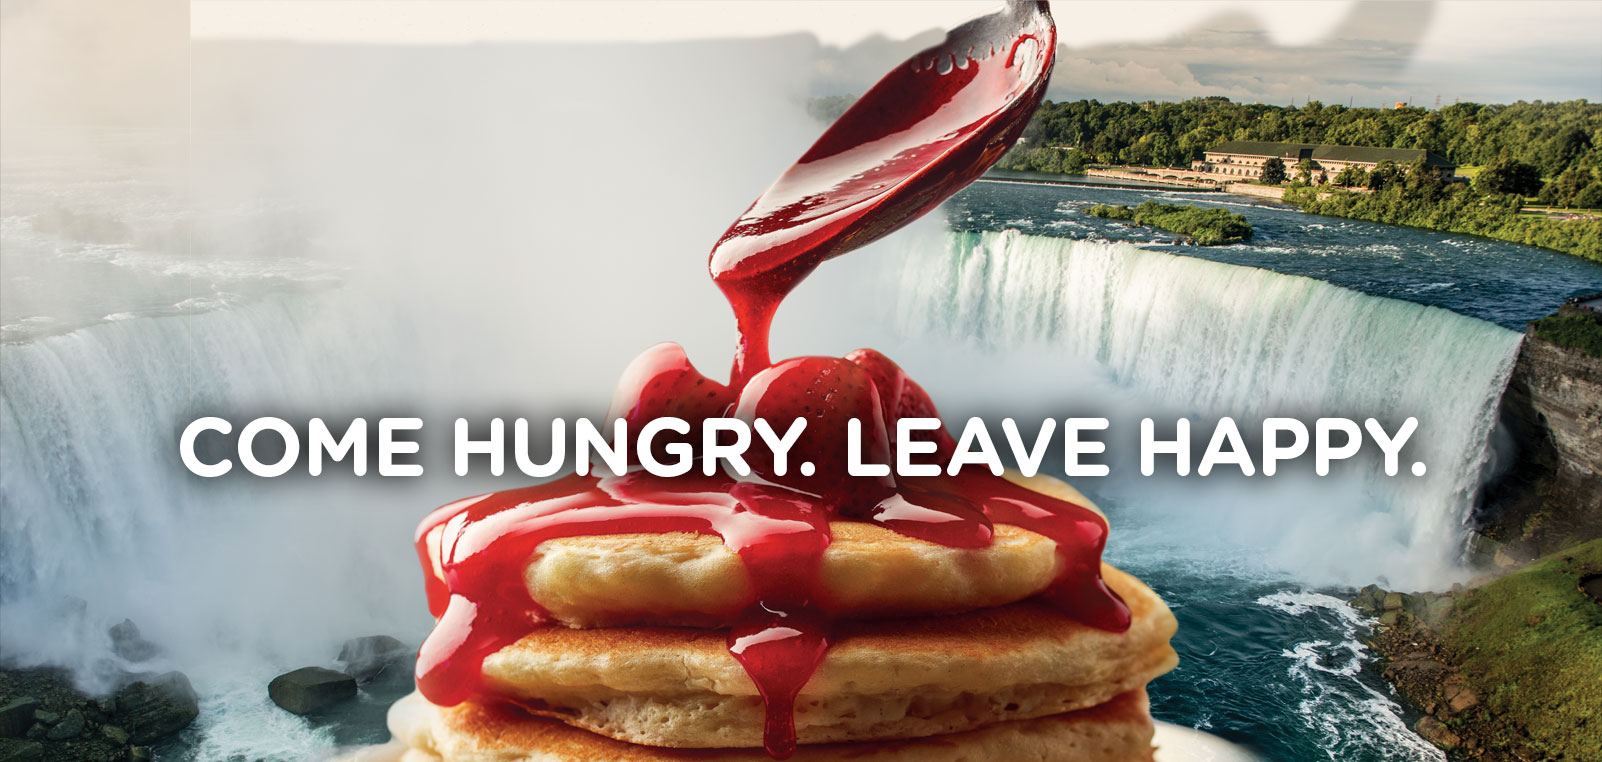 Come Hungry. Leave Happy. - IHOP Restaurant Niagara Falls